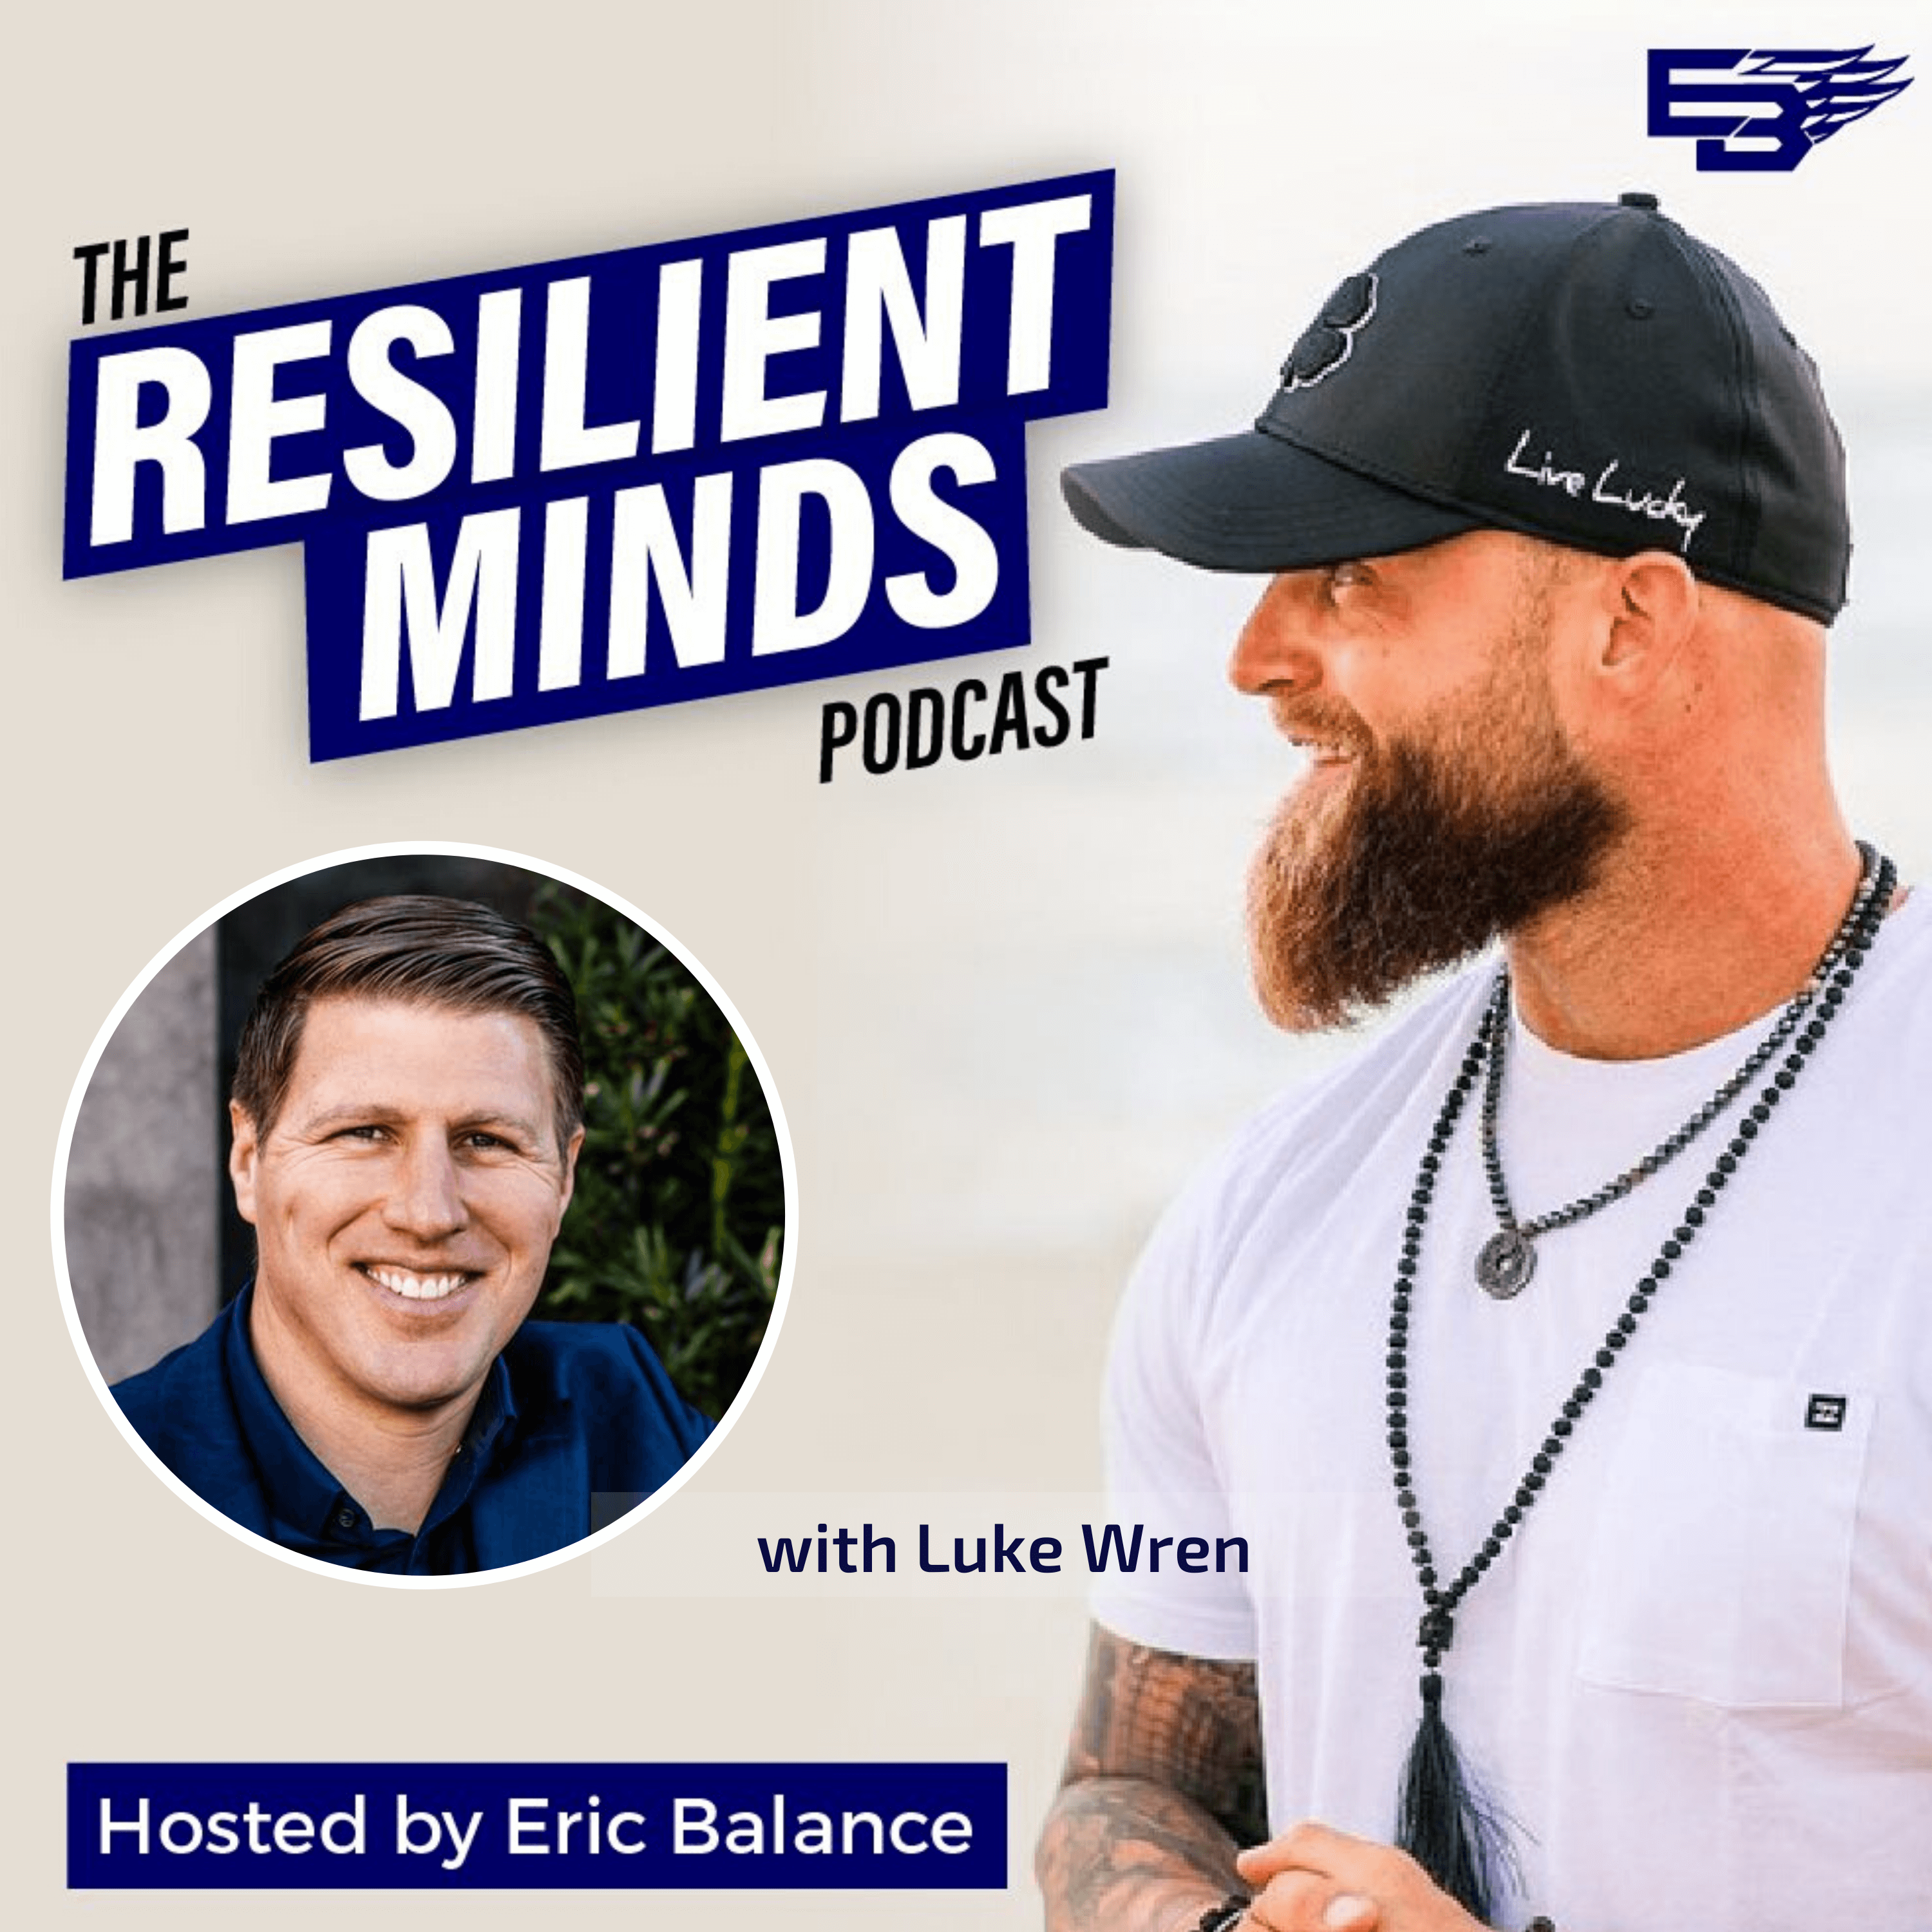 Episode 37 – Building Long-Lasting Self-Esteem, Confidence in Yourself and Uplifting Community with Luke Wren